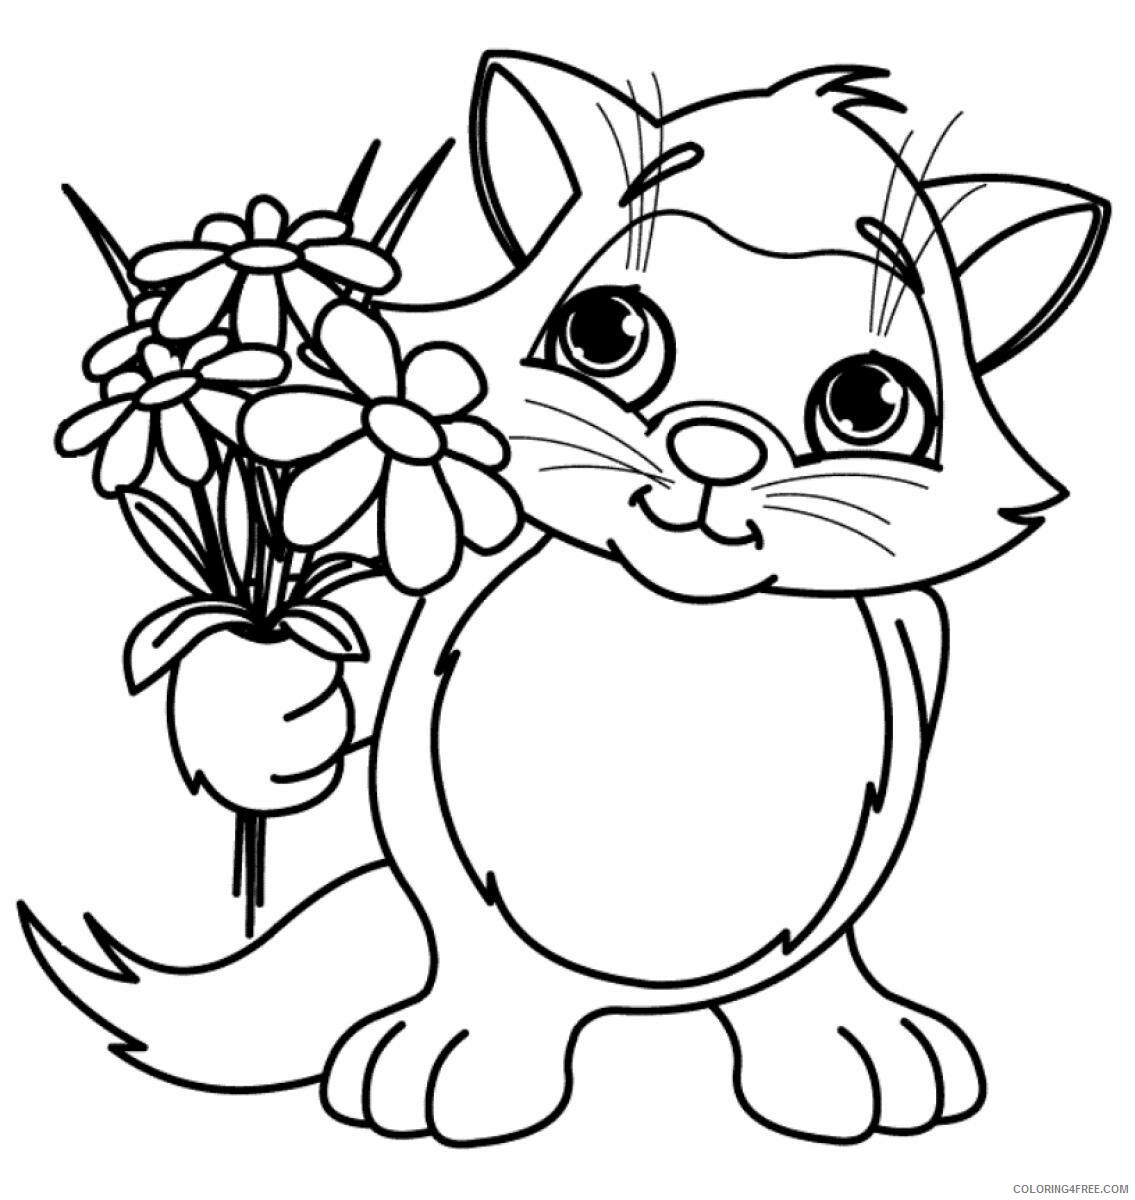 Cat Coloring Pages Animal Printable Sheets Cat with Flowers 2021 0832 Coloring4free